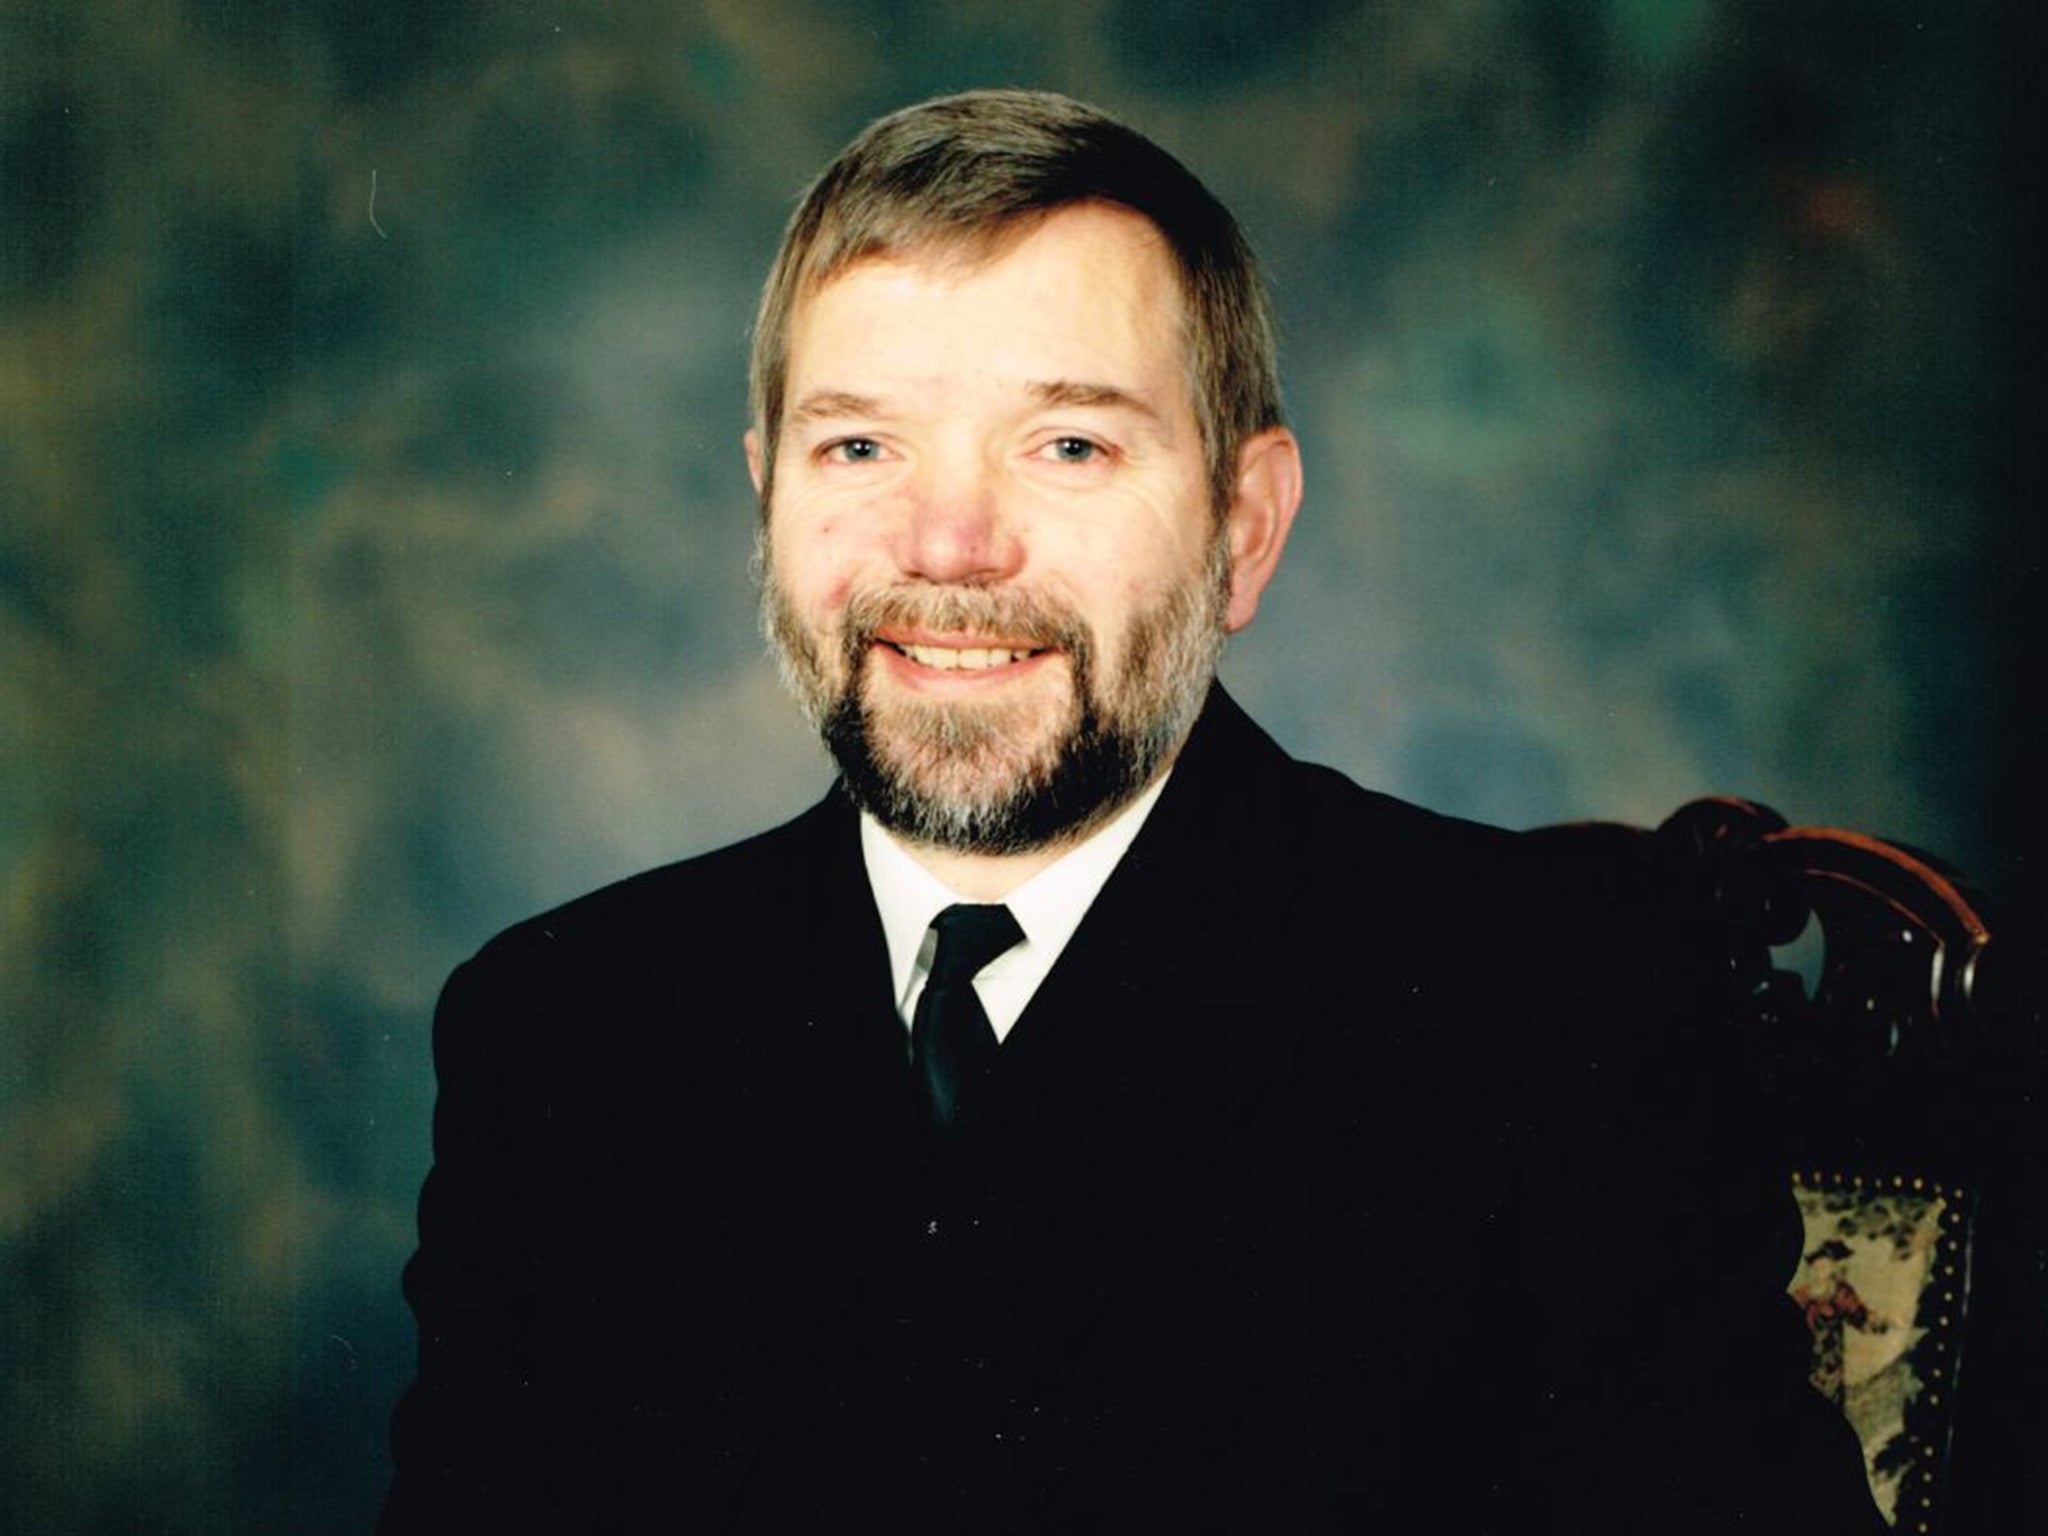 Rhod Palmer as a Royal Navy engineering officer in the 1980s